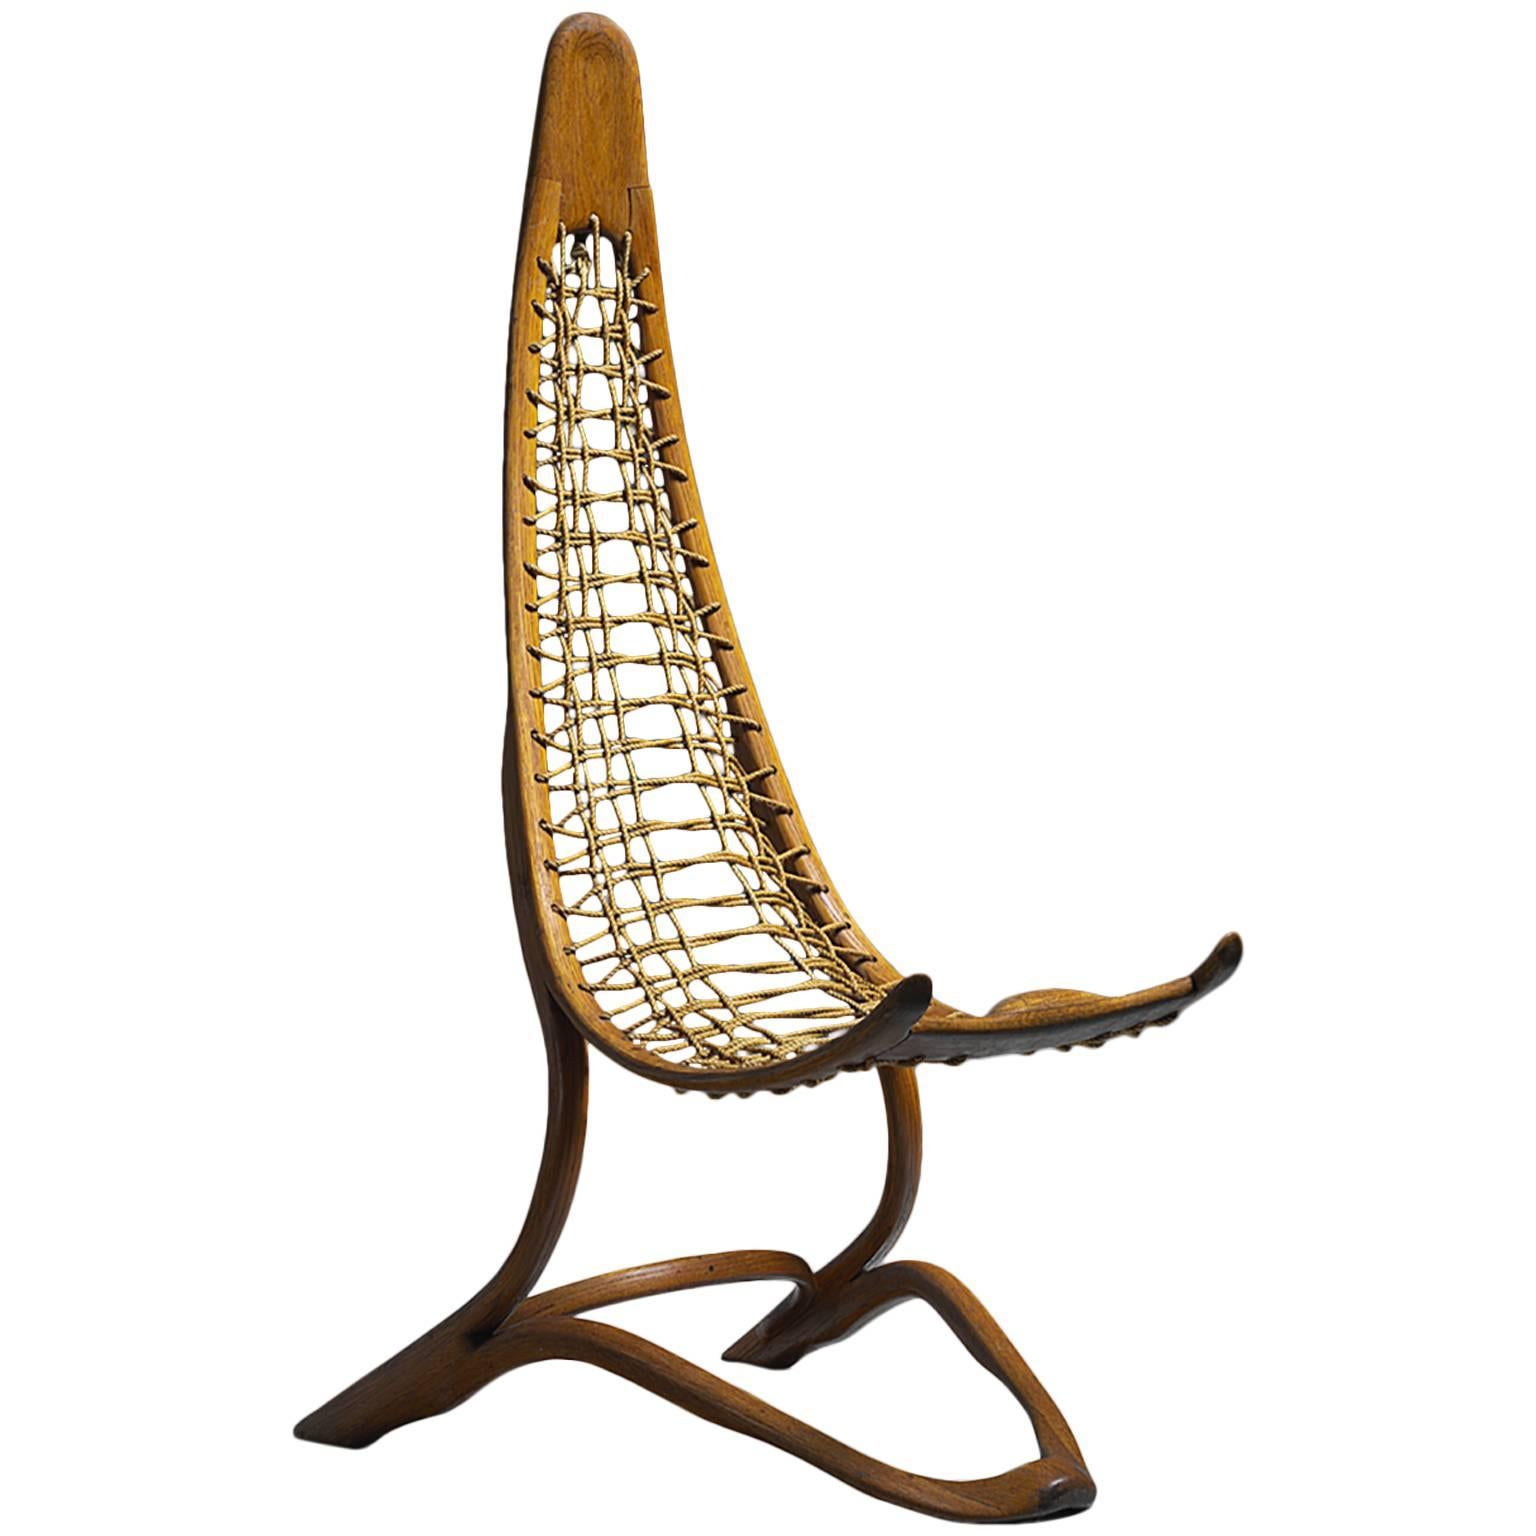 Unique Tall (161 cm / 63.4 inch) Oak and Rope American Studio Craft Chair, 1960s For Sale